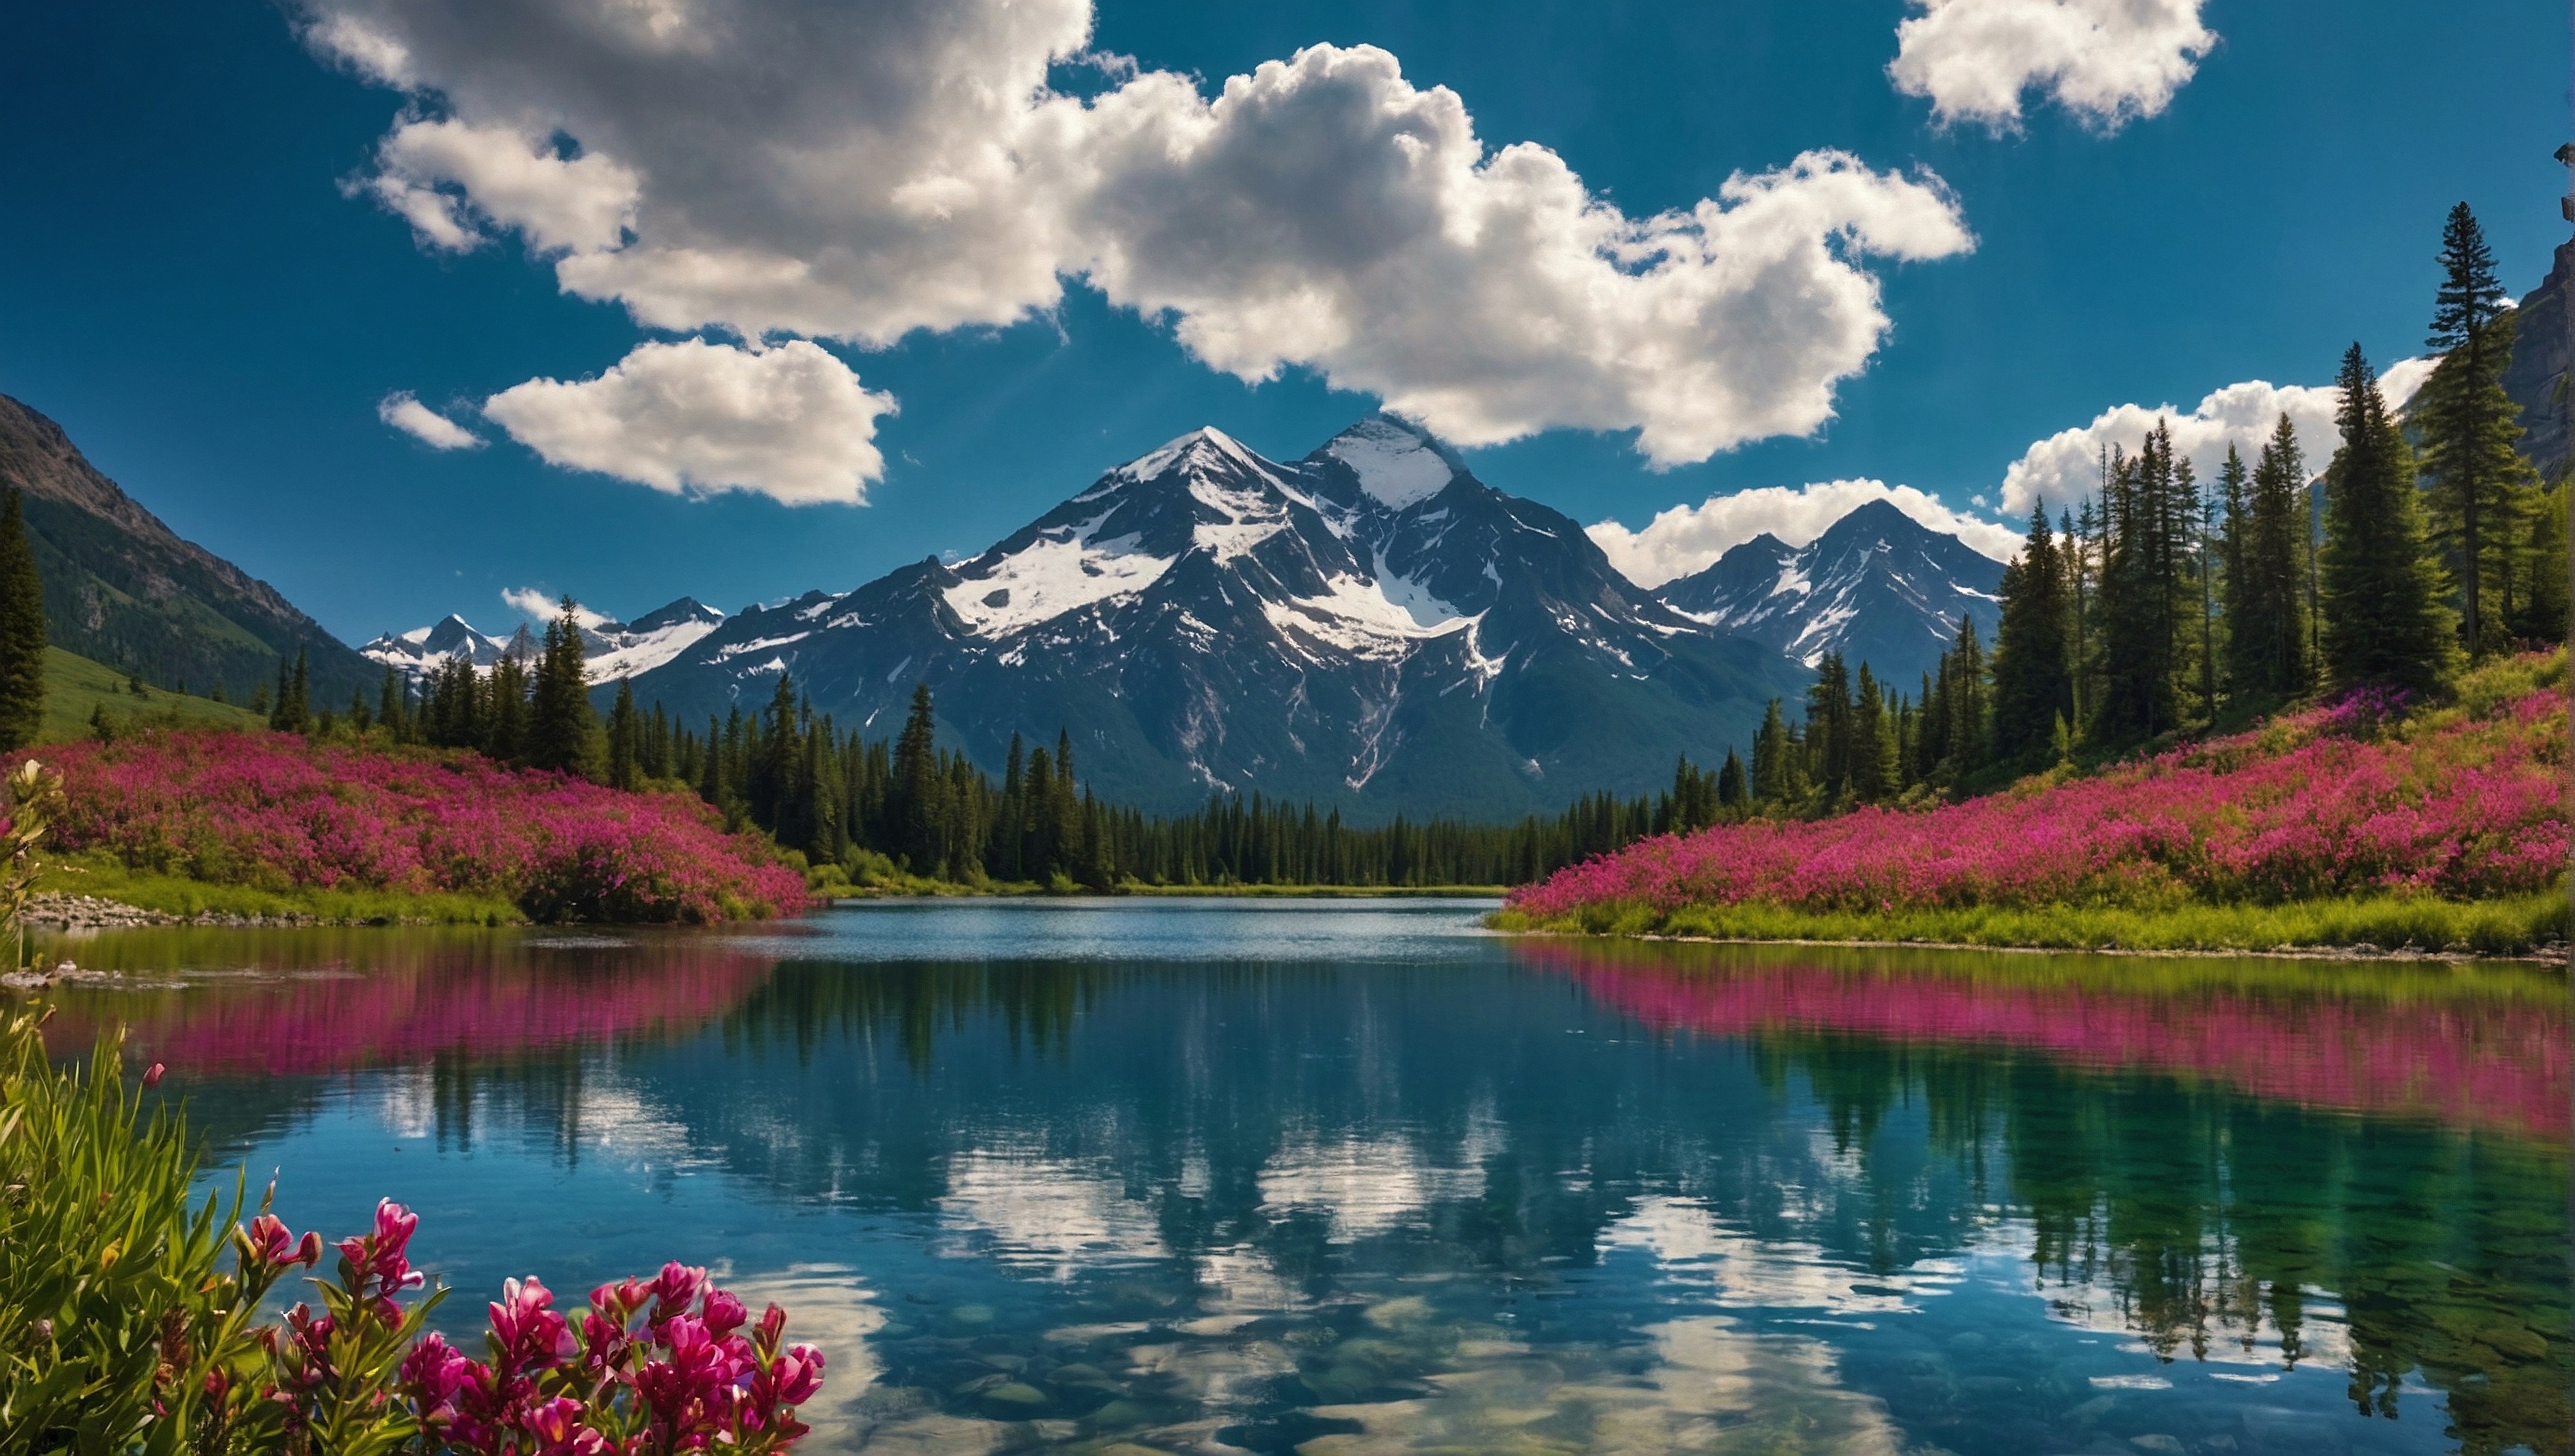 Free photo A beautiful scene with flowers and some snow capped mountains